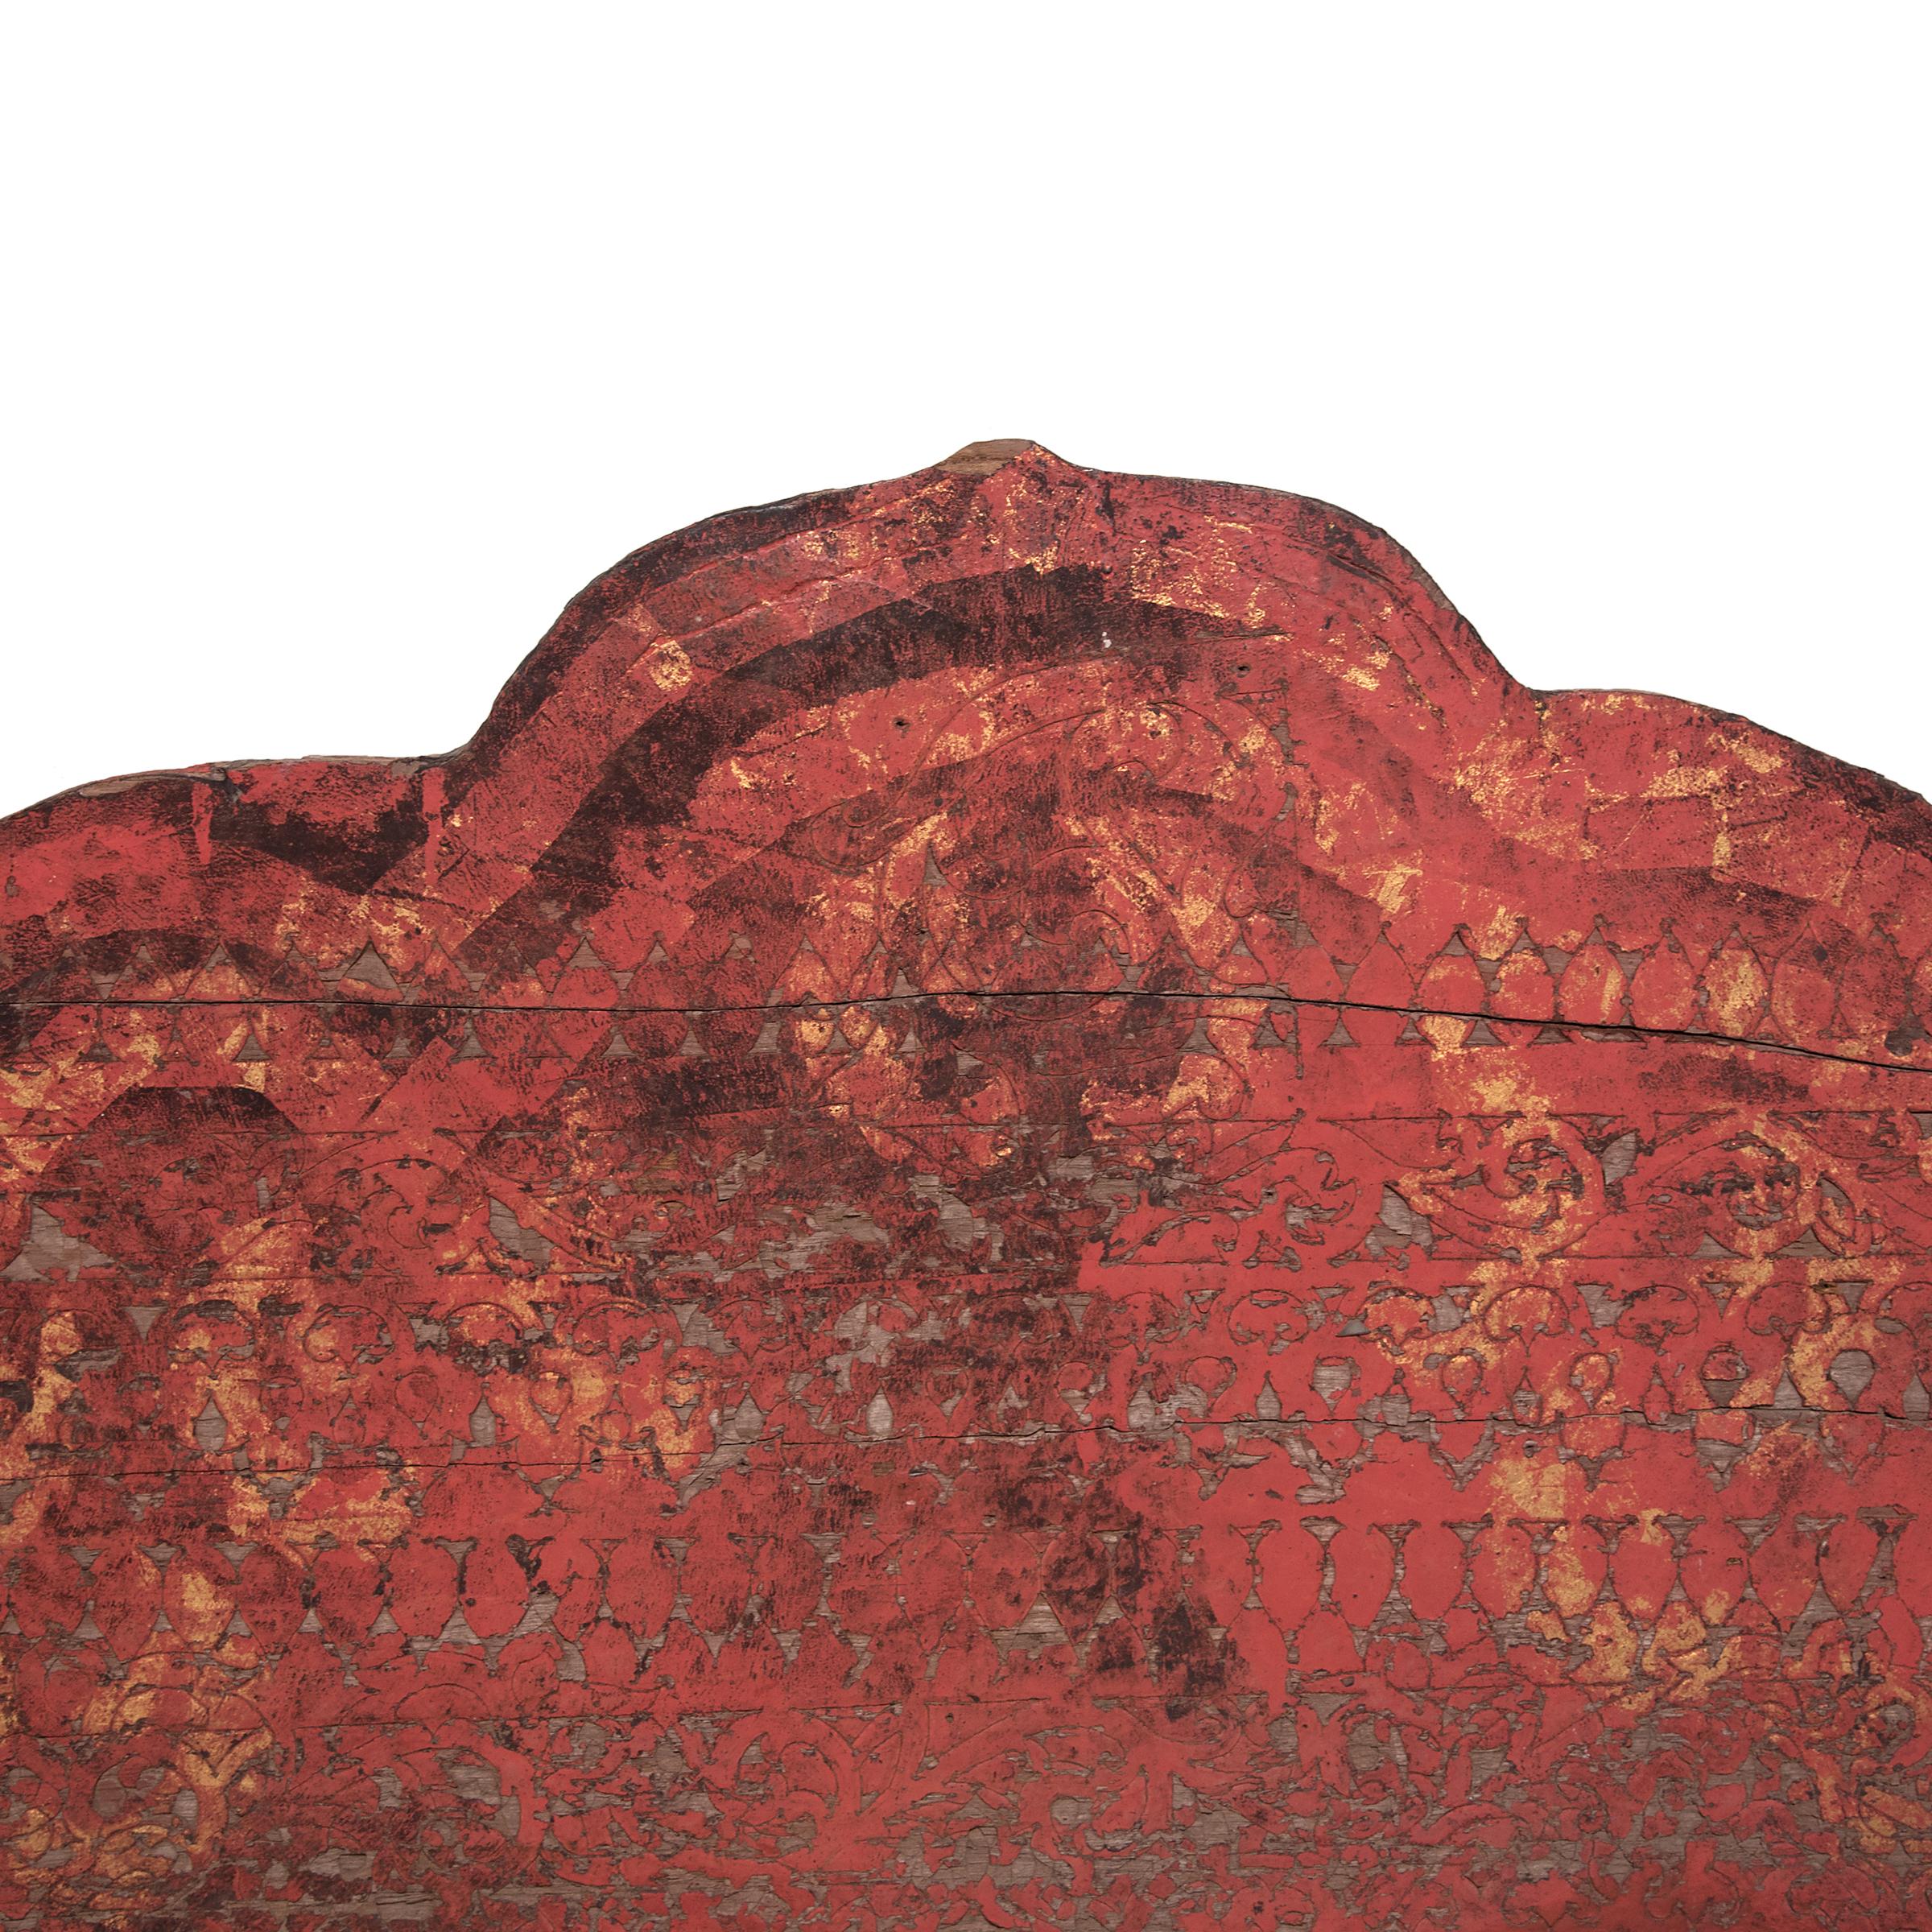 This antique architectural fragment beautifully exemplifies the textured wear and soft patina that only time can achieve. Given its cusped arch shape and flame-like corners, the panel may have originated as an overhead element to a door, archway, or